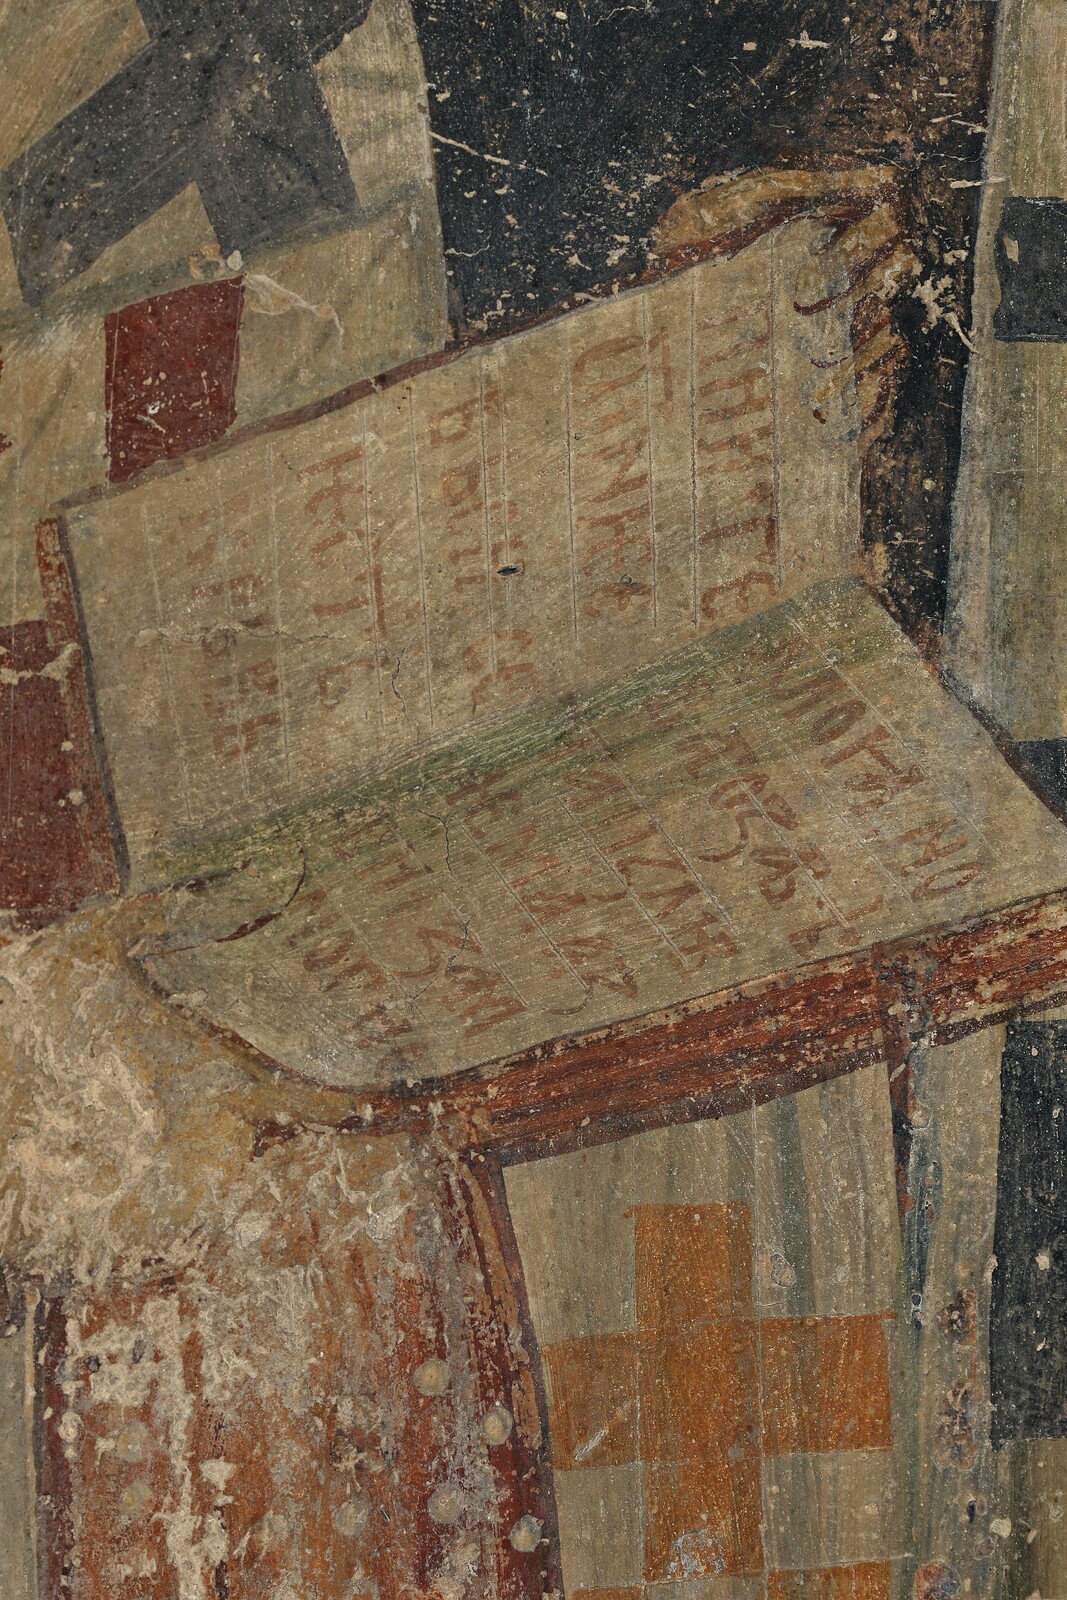 Liturgy of the Archpriests, detail